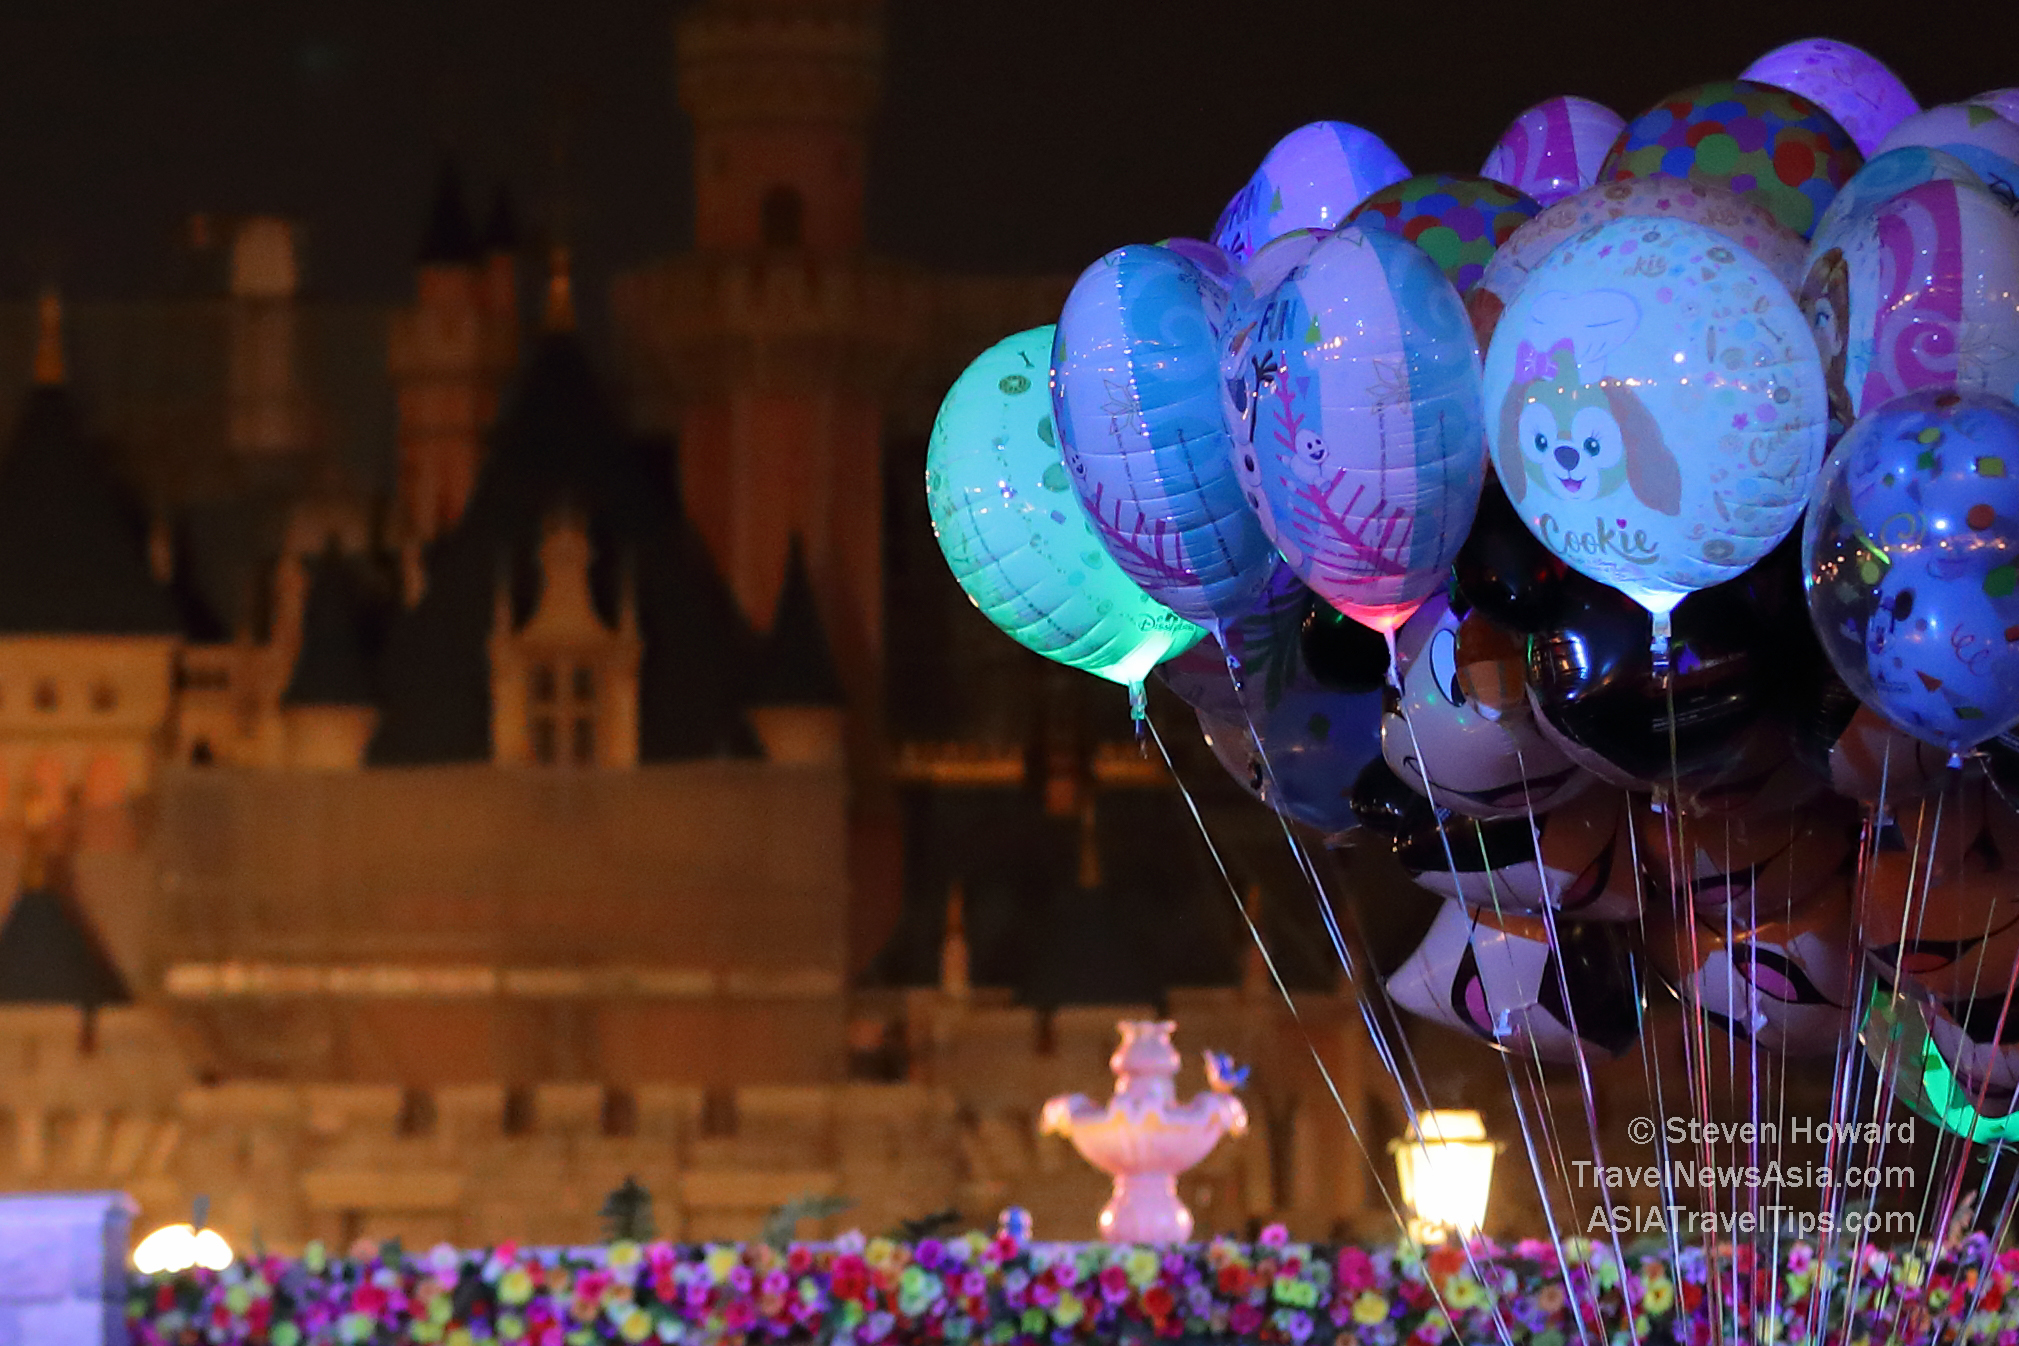 Balloons in the foreground with the blurred image of Hong Kong Disneyland Castle in the background. Picture by Steven Howard of TravelNewsAsia.com Click to enlarge.